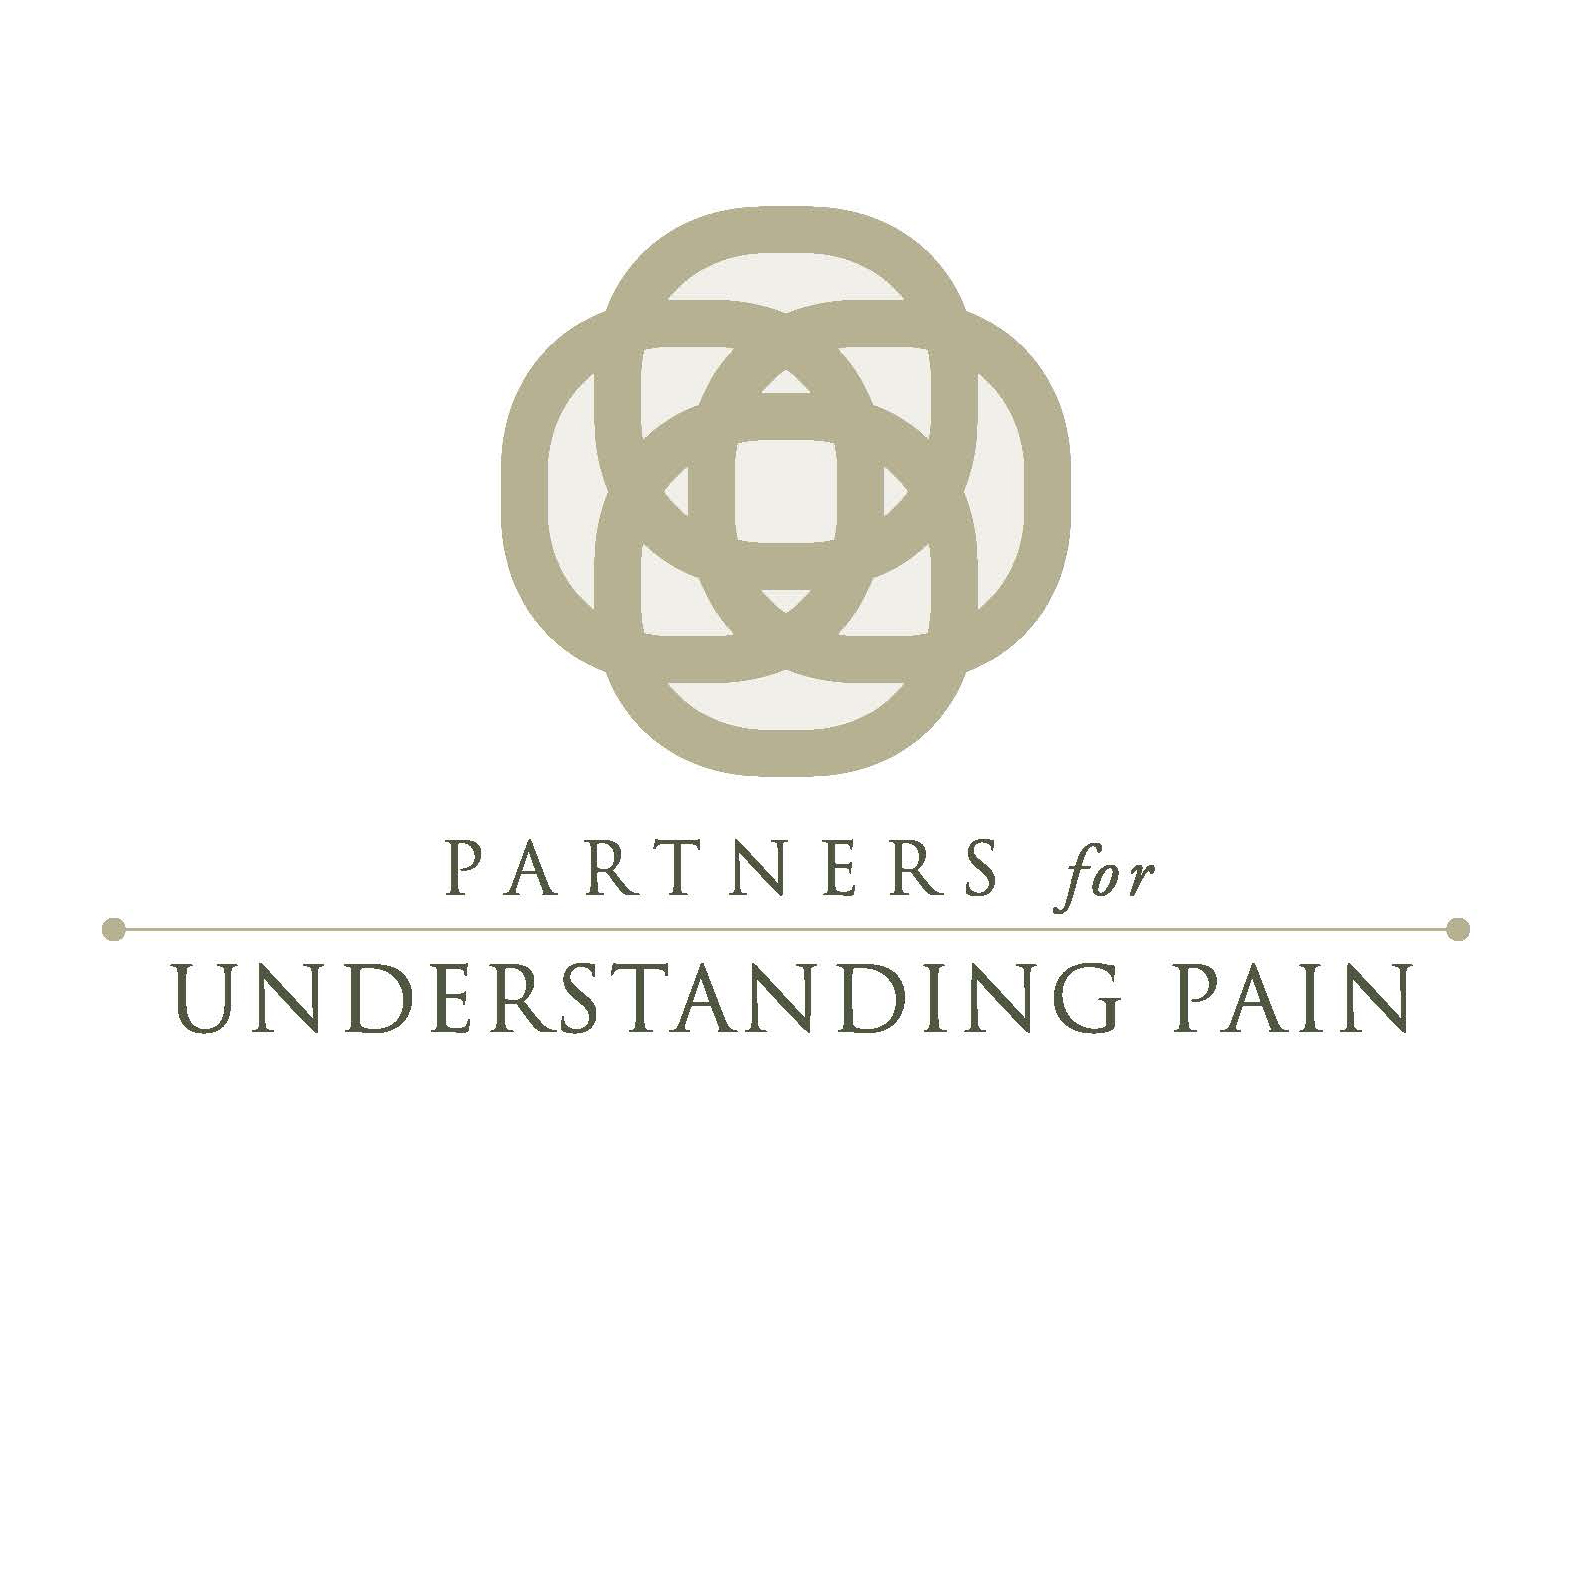 Striving for Integrative Pain Care: Pain Awareness Month 2017